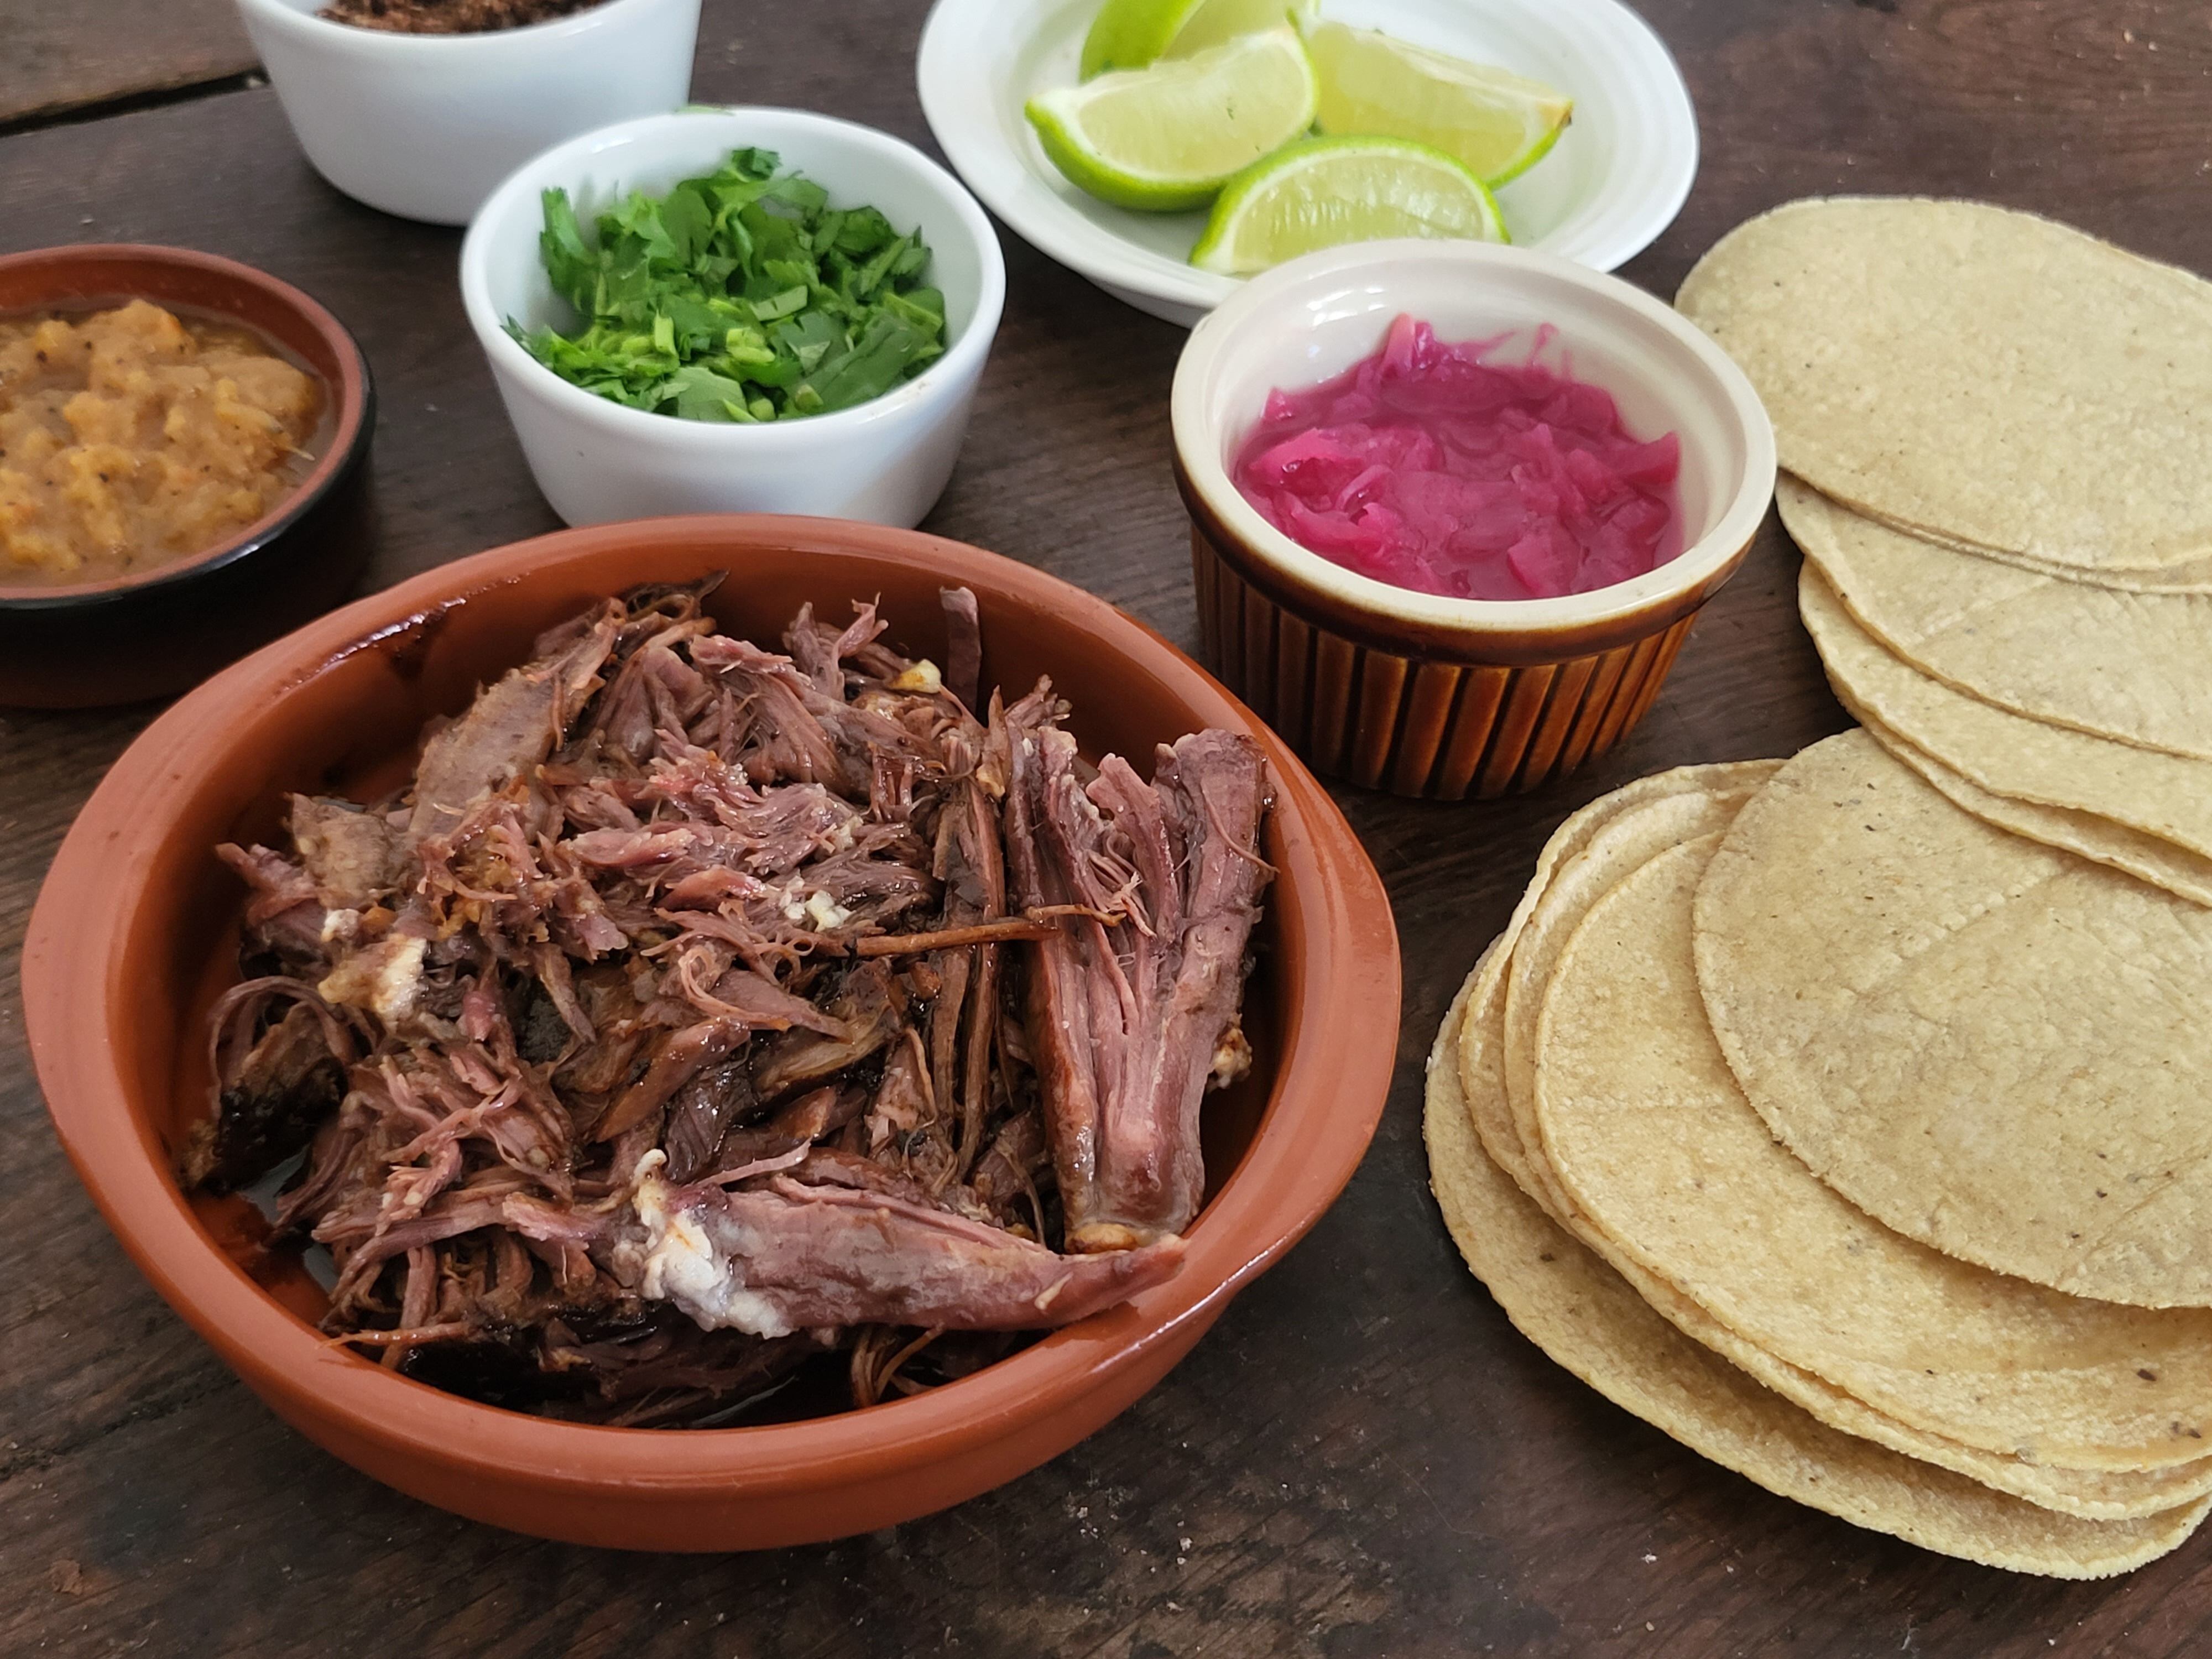 Food review: Beefing up the Mexican staple with El Pastor